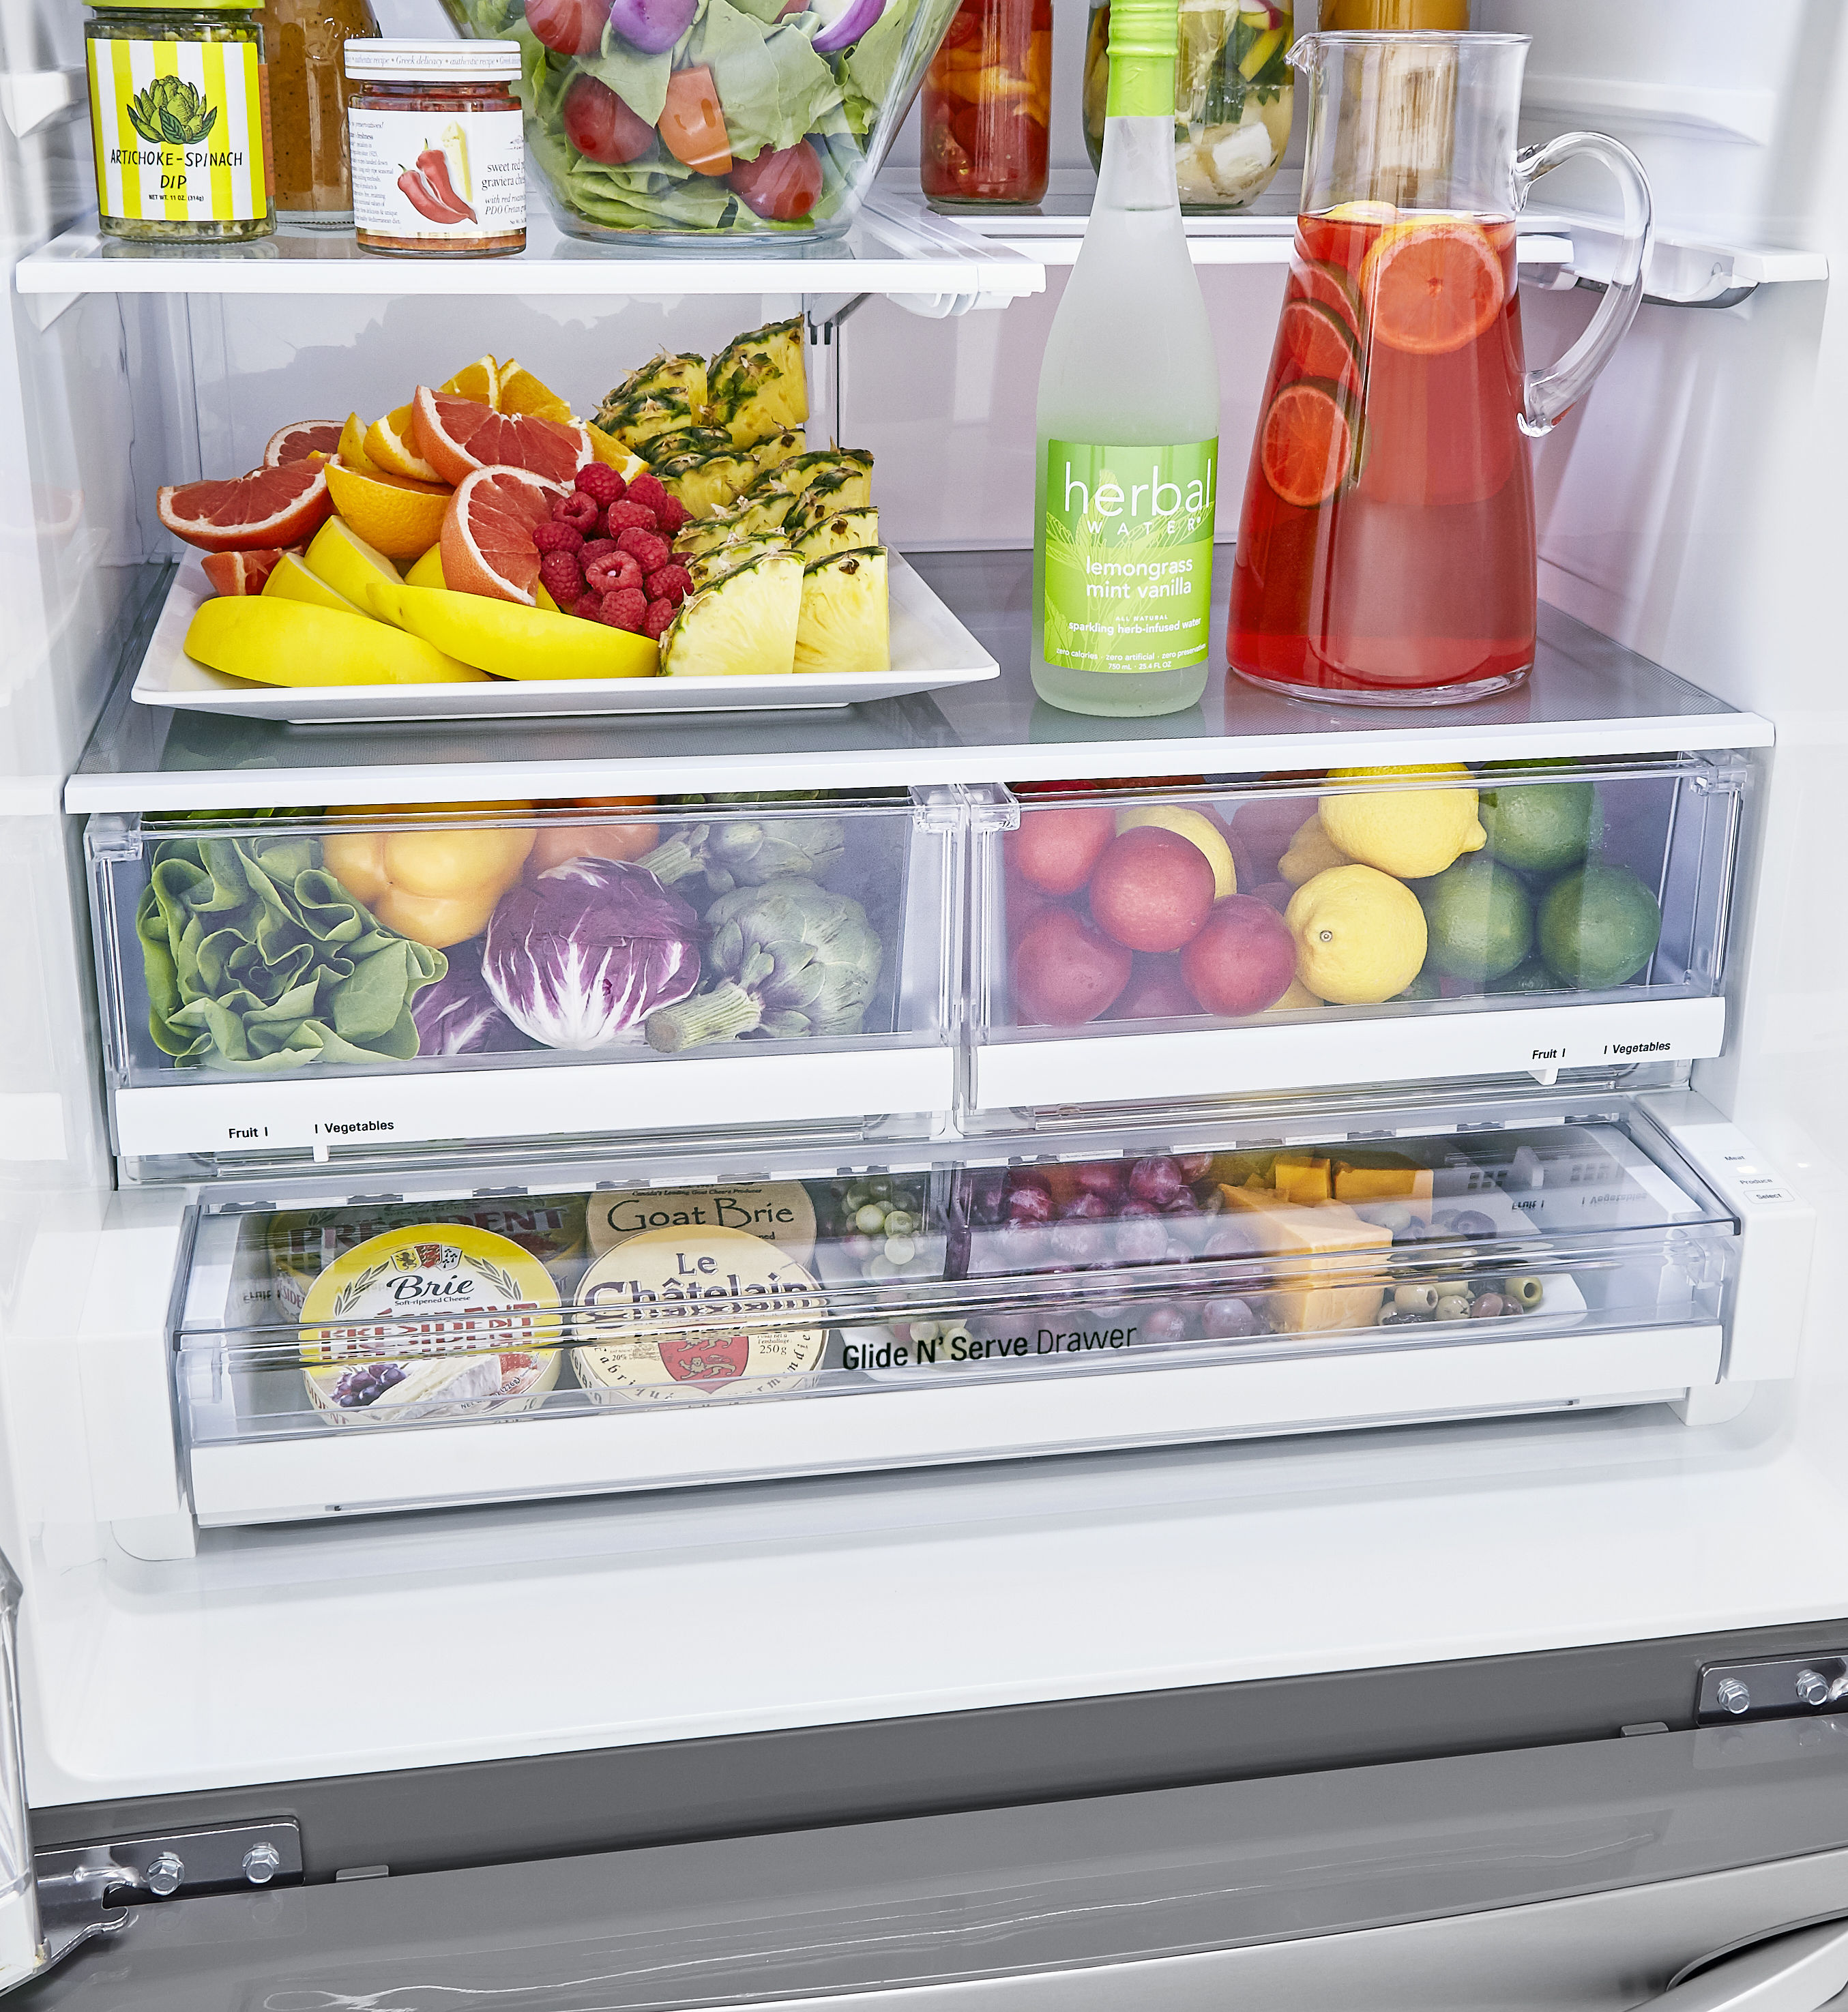 LG 24.5-cu ft Smart French Door Refrigerator with Ice Maker ...